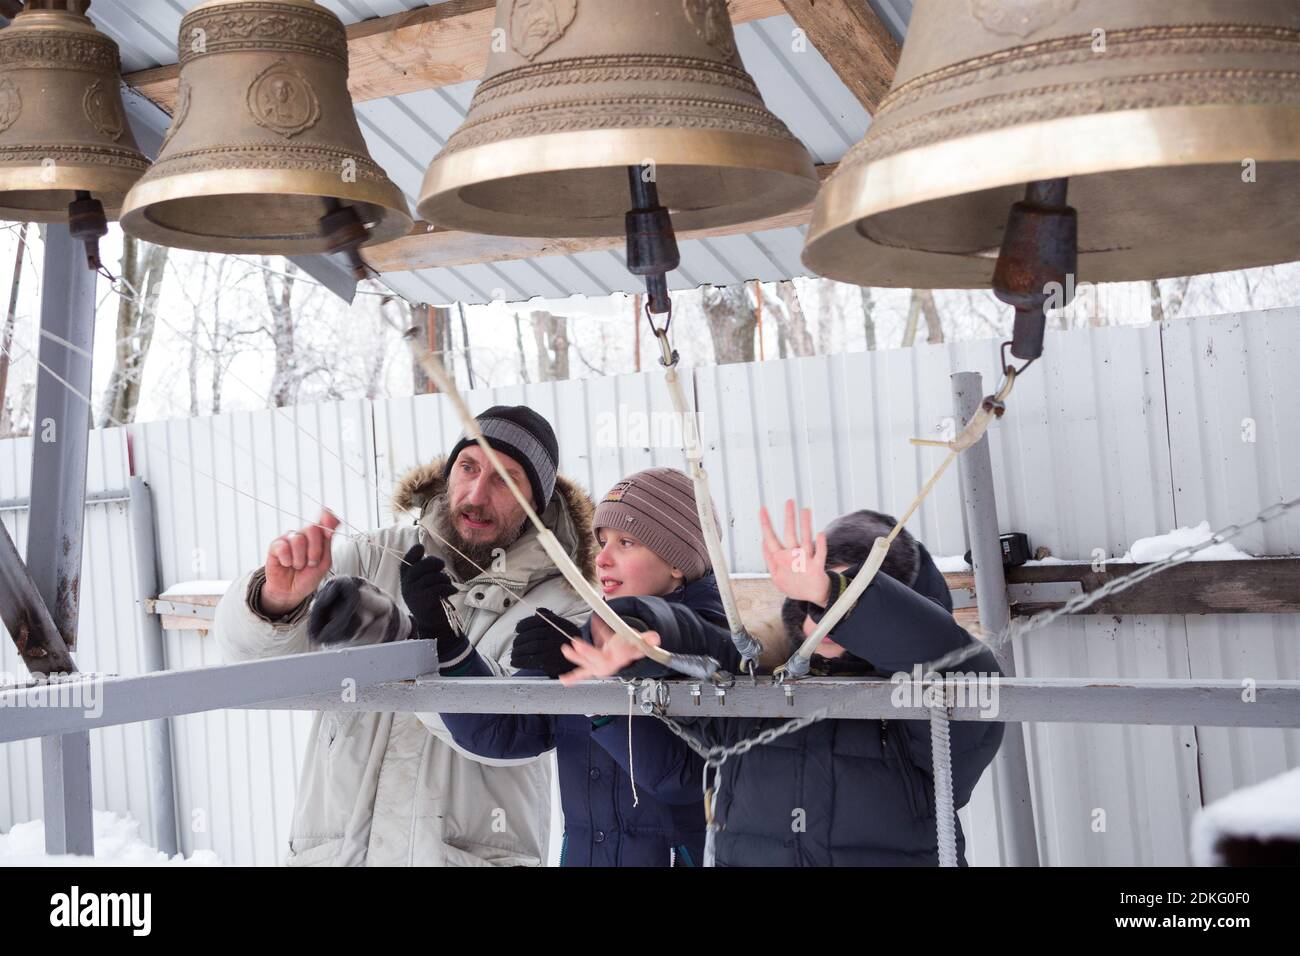 Penza, Russia - January 16, 2016: The bell ringer gives two boys a lesson of bell ringing at the open bell tower of the restored cathedral on a frosty Stock Photo